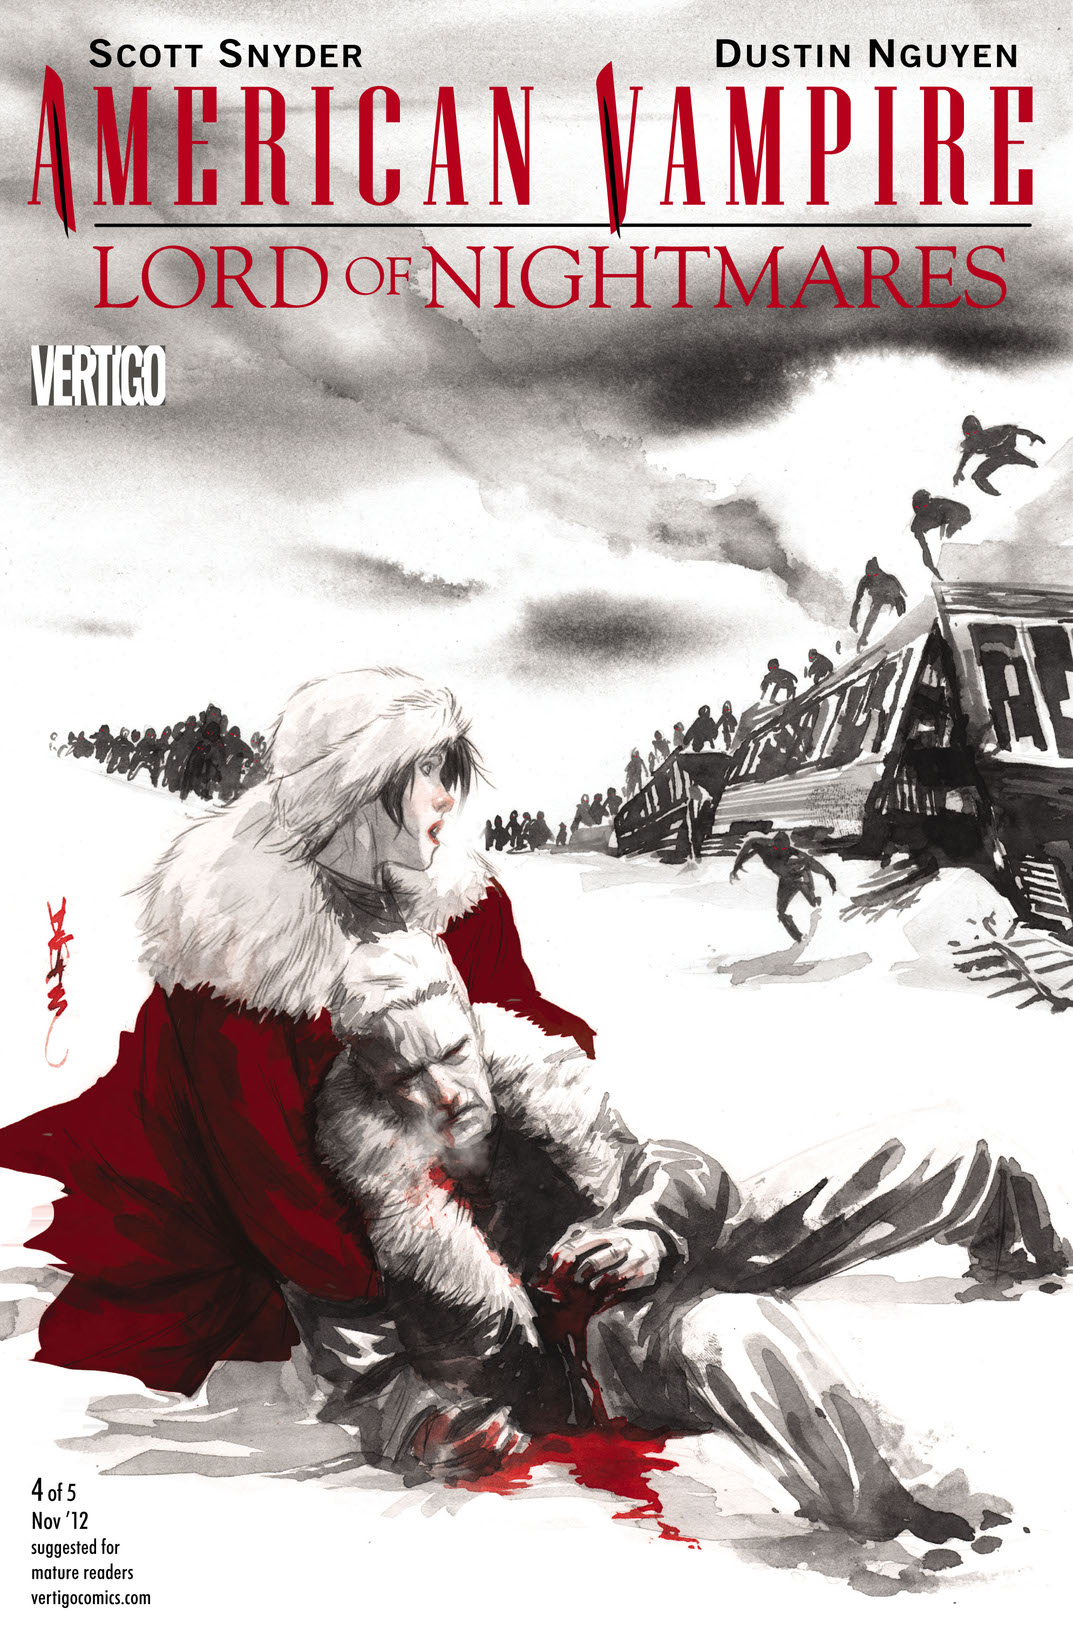 American Vampire: Lord of Nightmares #4 preview images